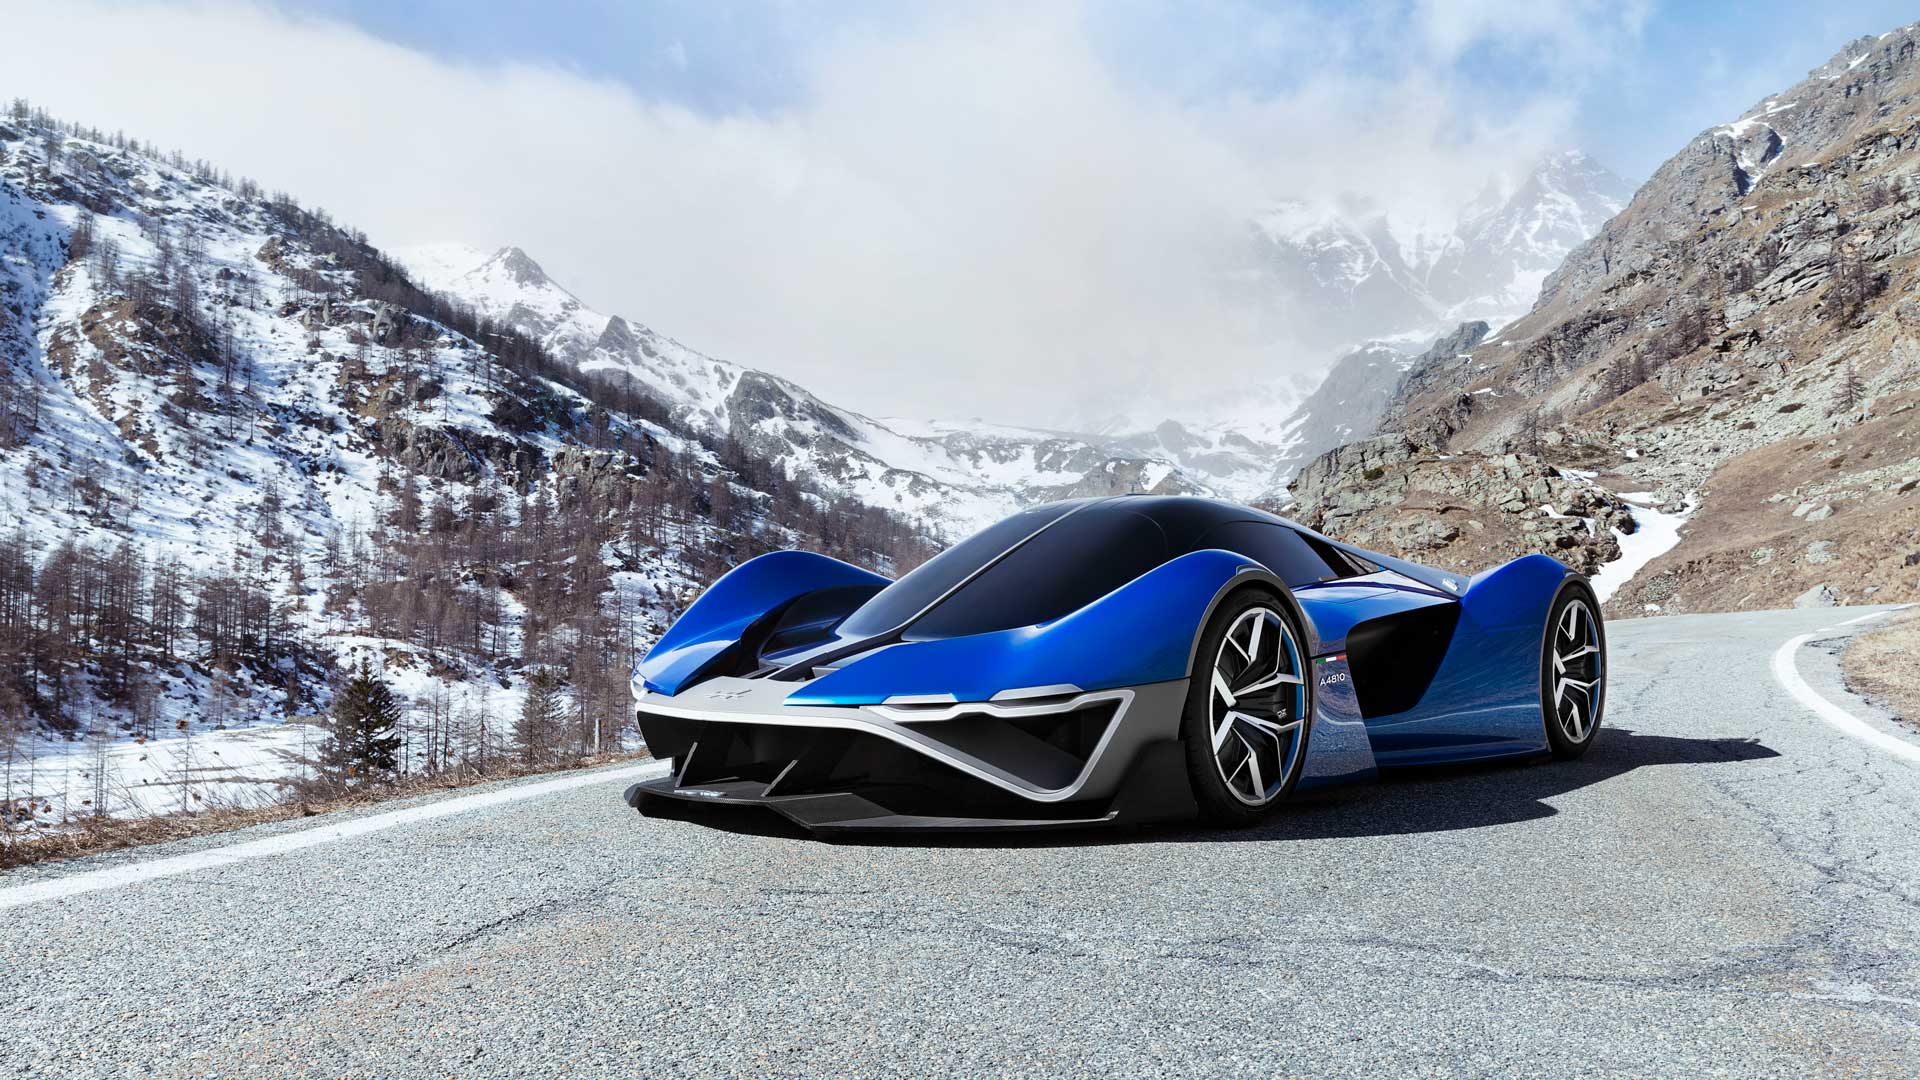 Hypercar-a-idrogeno-A4810-Project-by-IED-Robb-Report-Italia